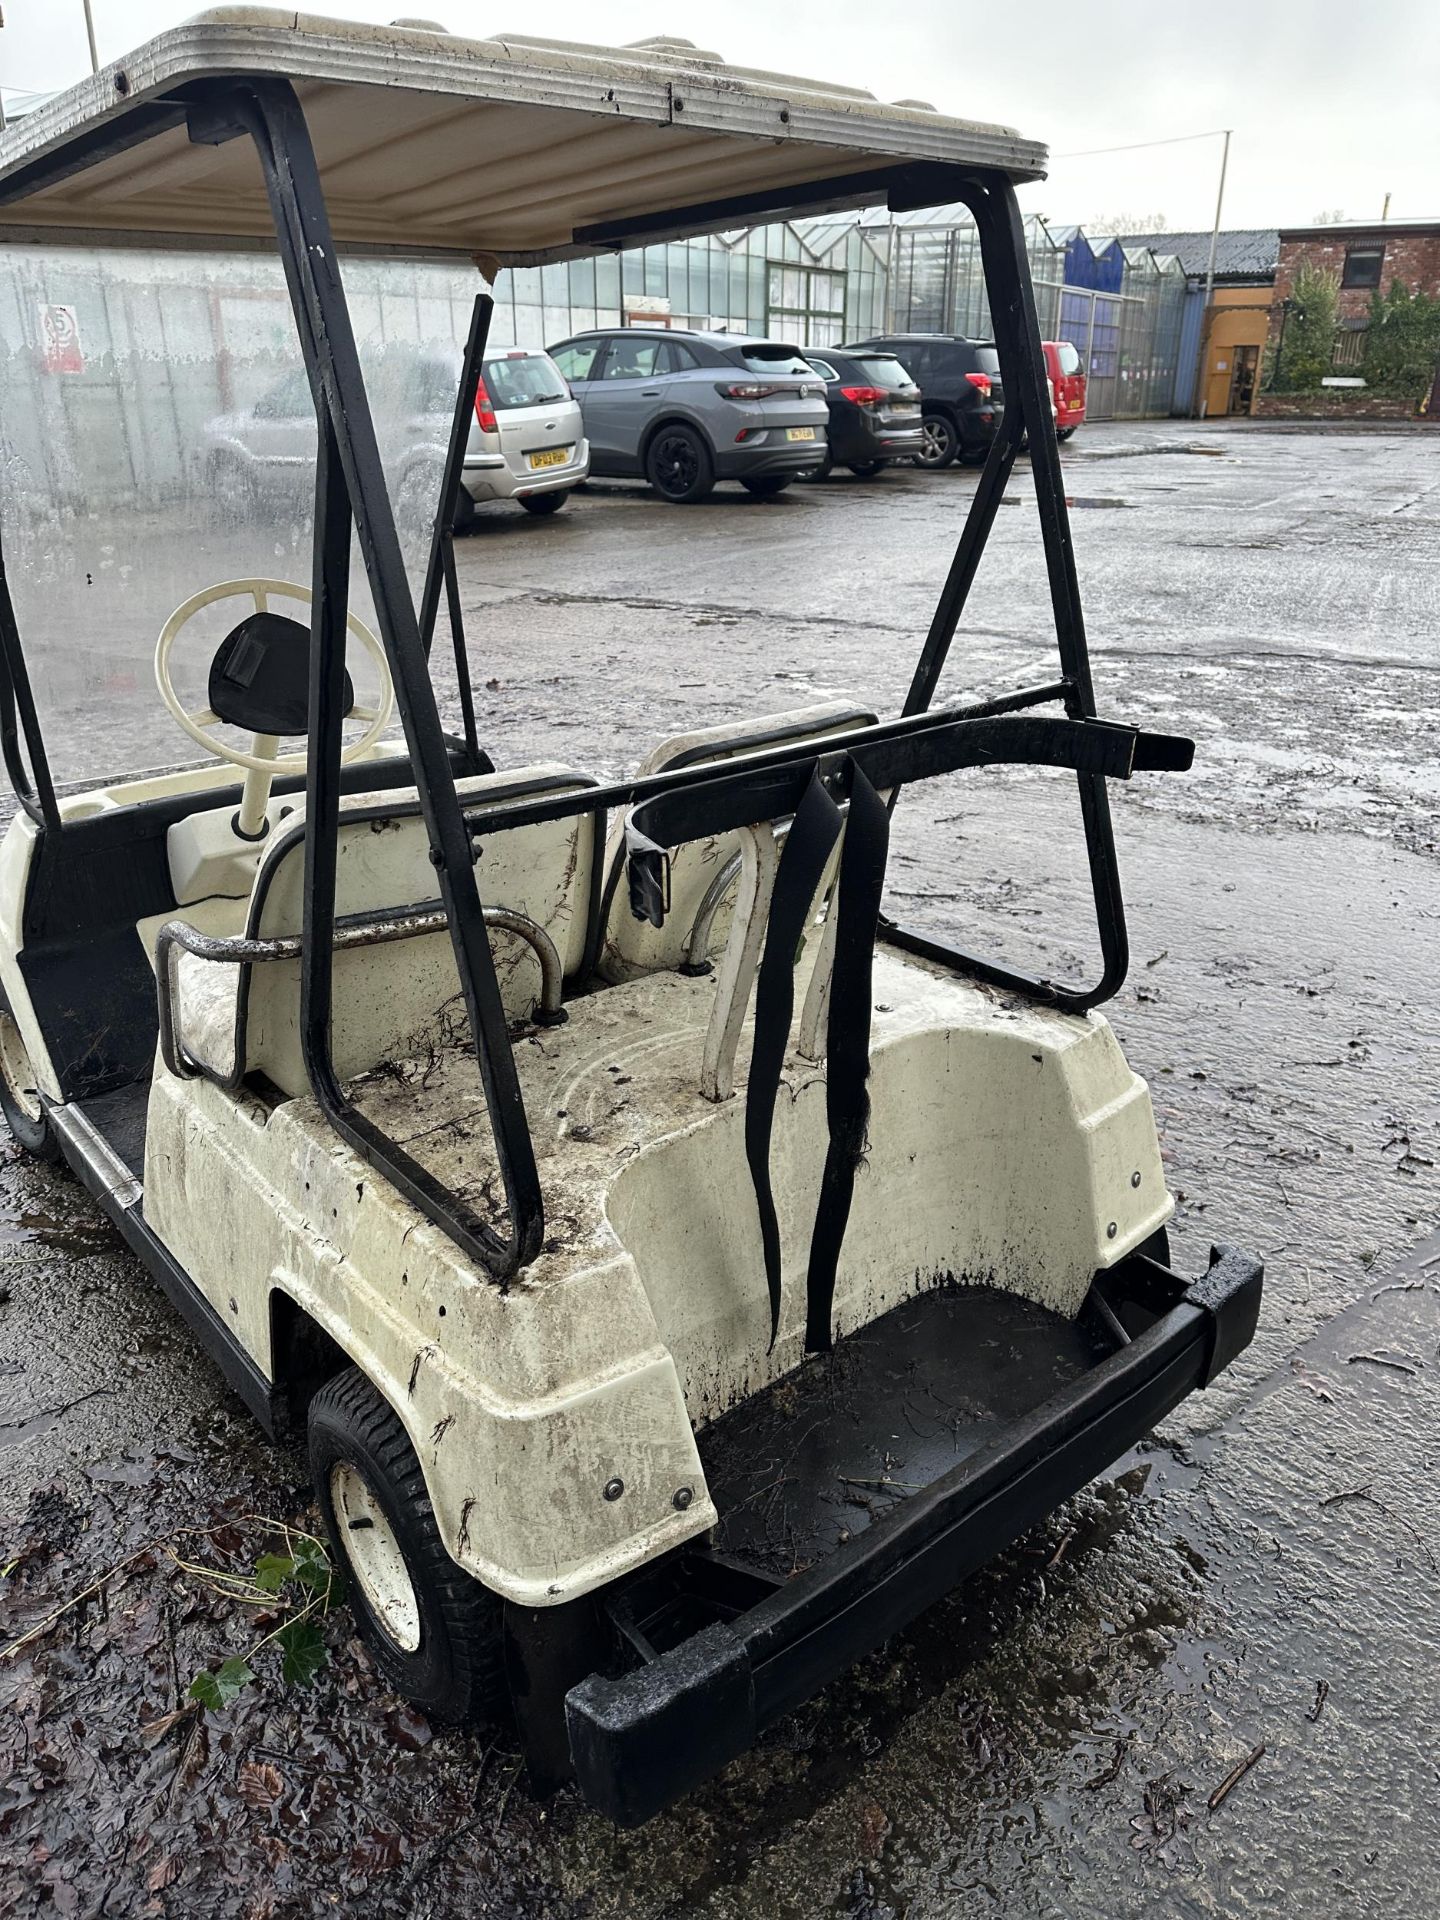 A WHITE YAMAHA ELECTRIC GOLF BUGGY COMPLETE WITH KEY - Image 6 of 6